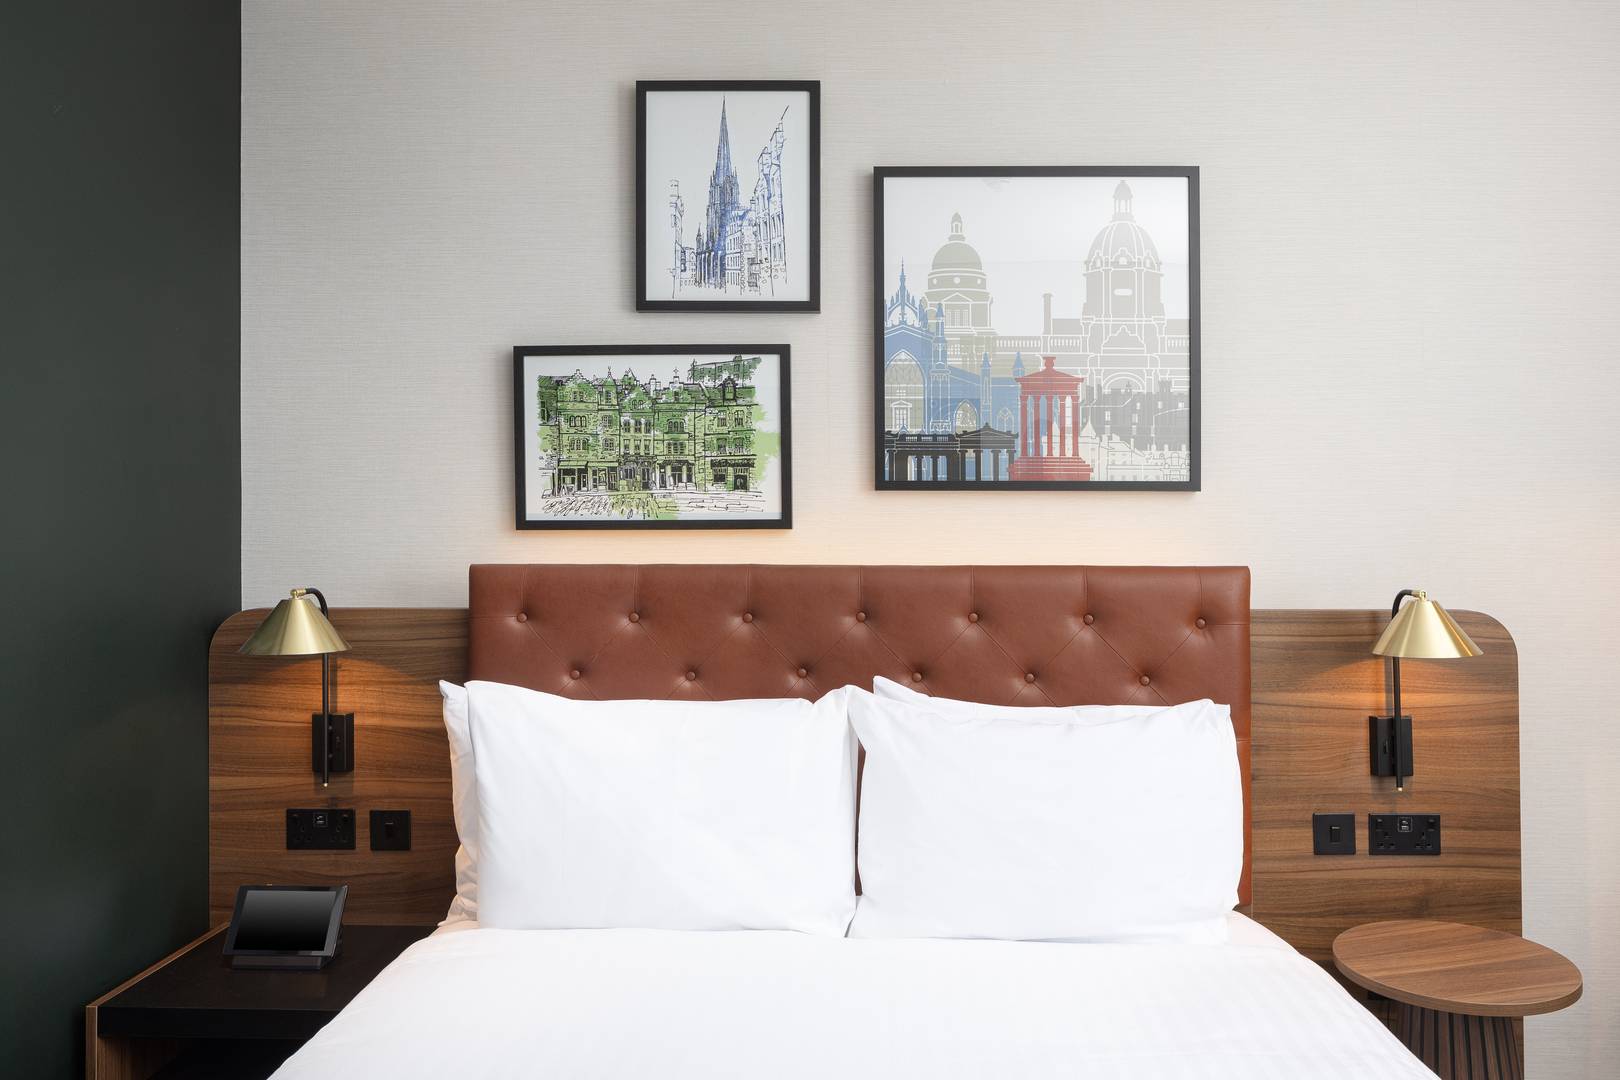 Large bed with leather headboard and pictures of the city above